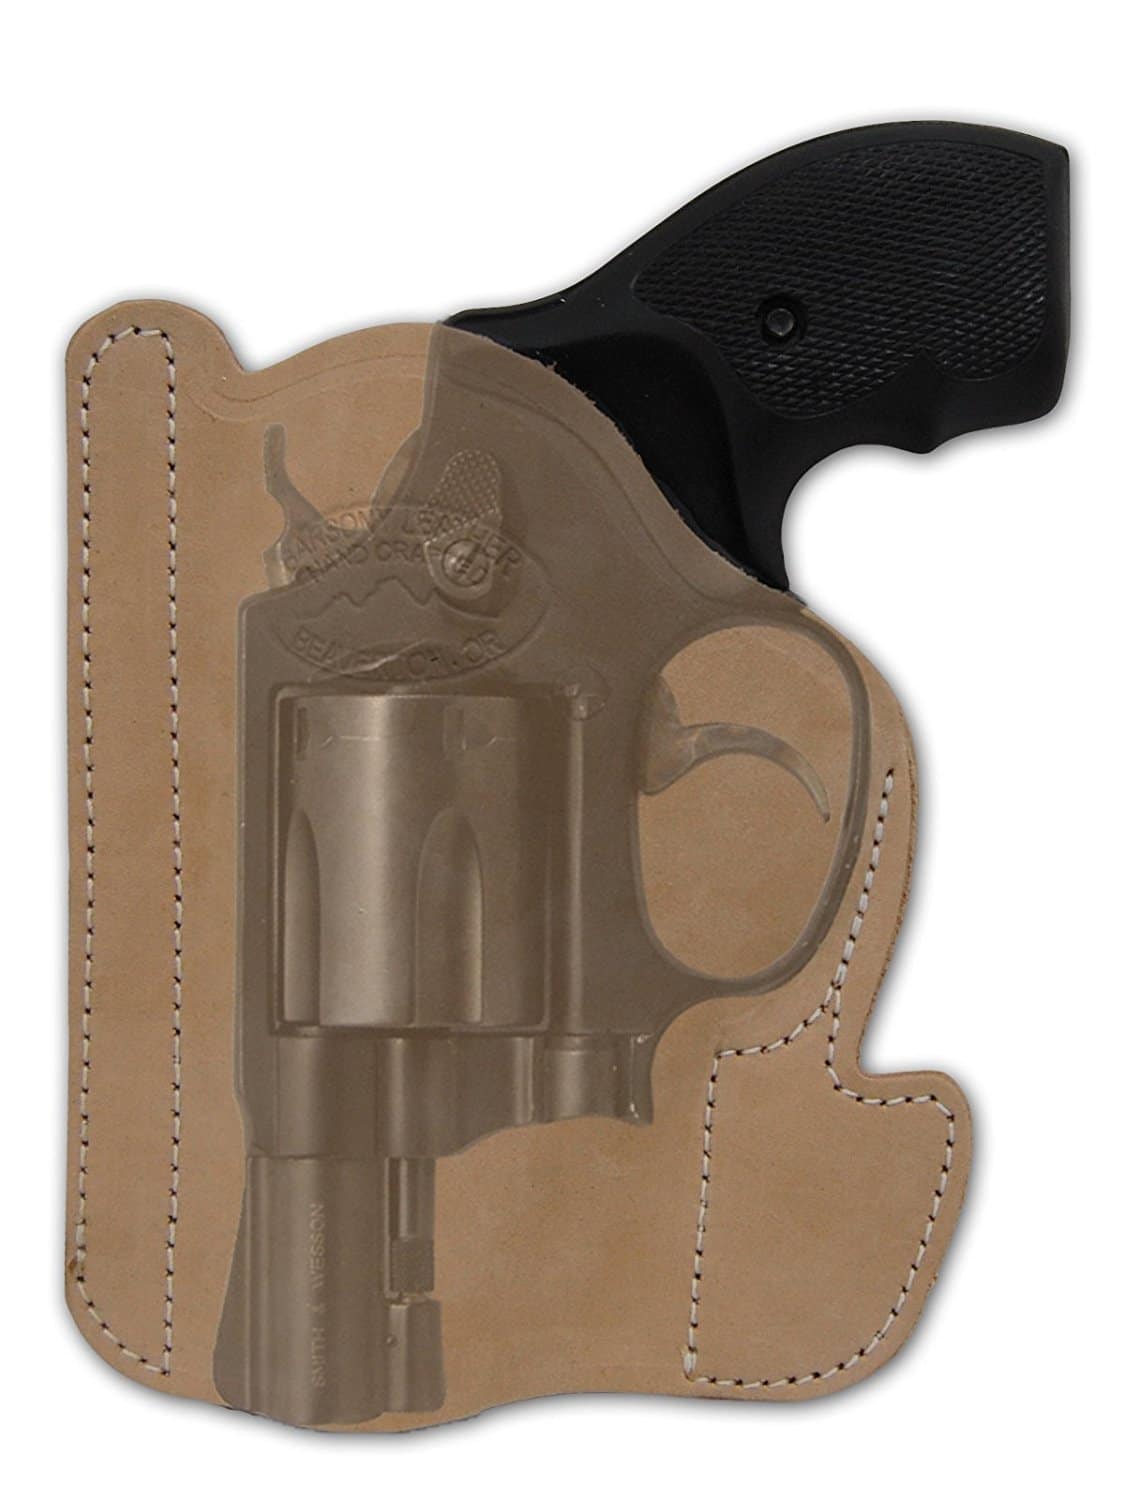 Our Top 10 Ruger LCR Pocket Holsters Review + Top Pick.